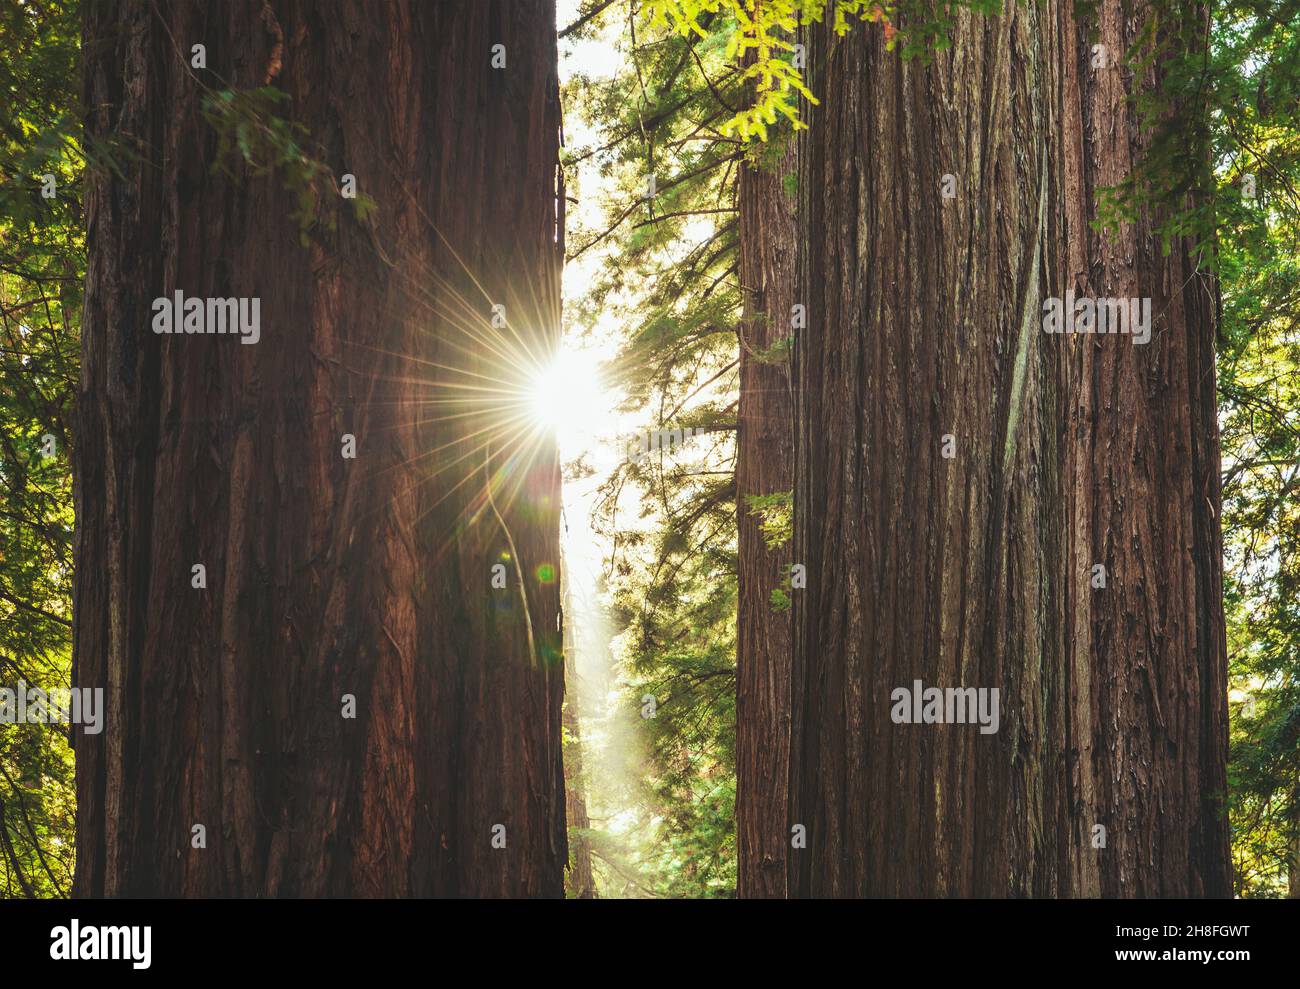 Two Ancient Redwood Trees and the Sun Between. Redwood National and State Parks, California, United States. Stock Photo